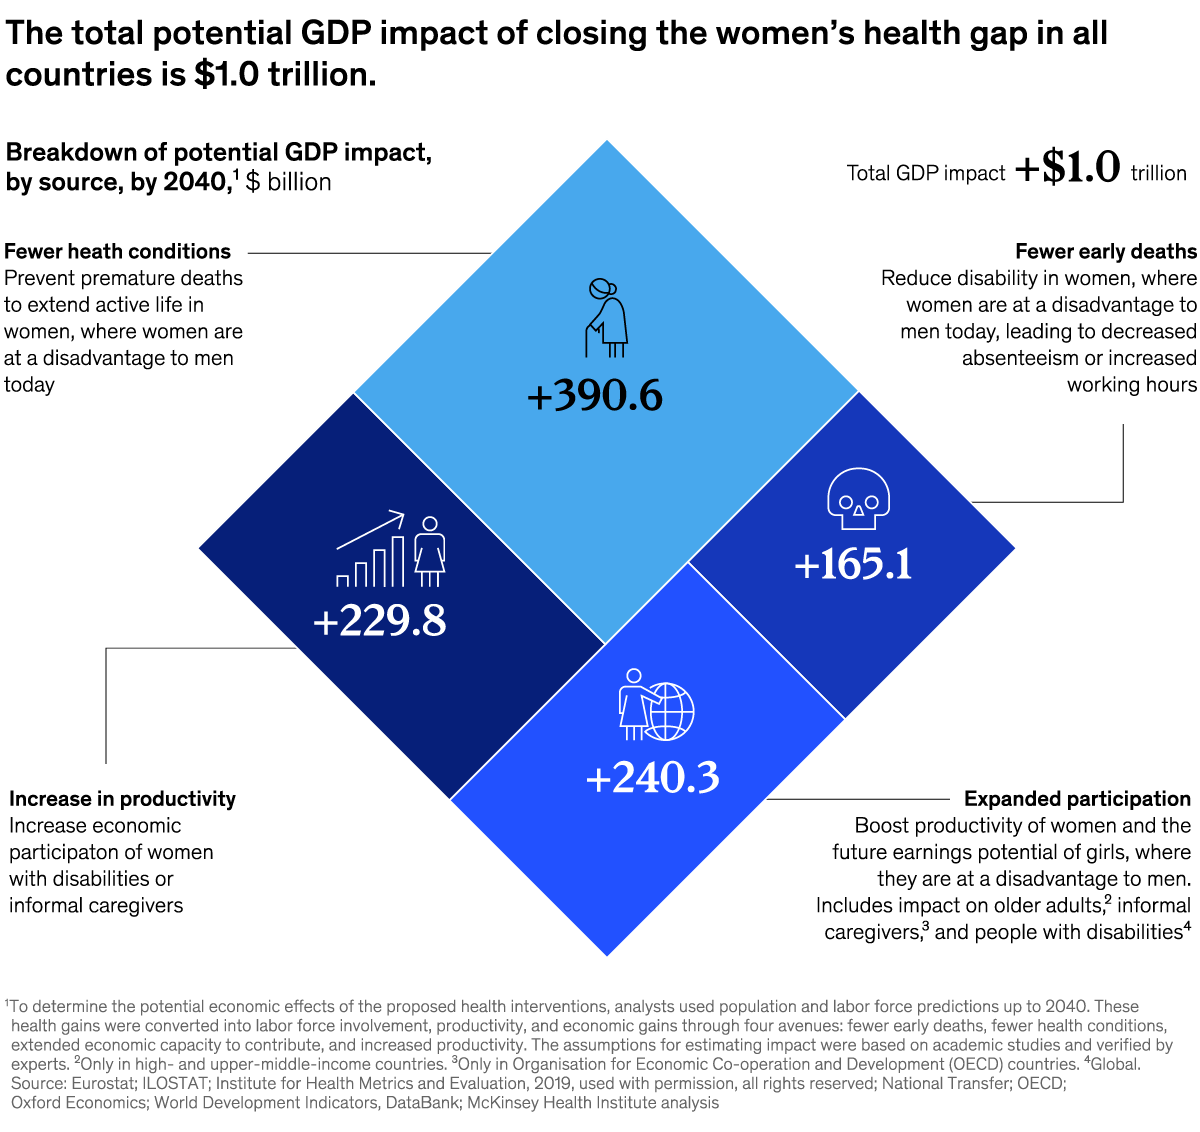 A chart titled “The total potential GDP impact of closing the women's health gap in all countries is $1.0 trillion.” Click to open the full article on McKinsey.com.